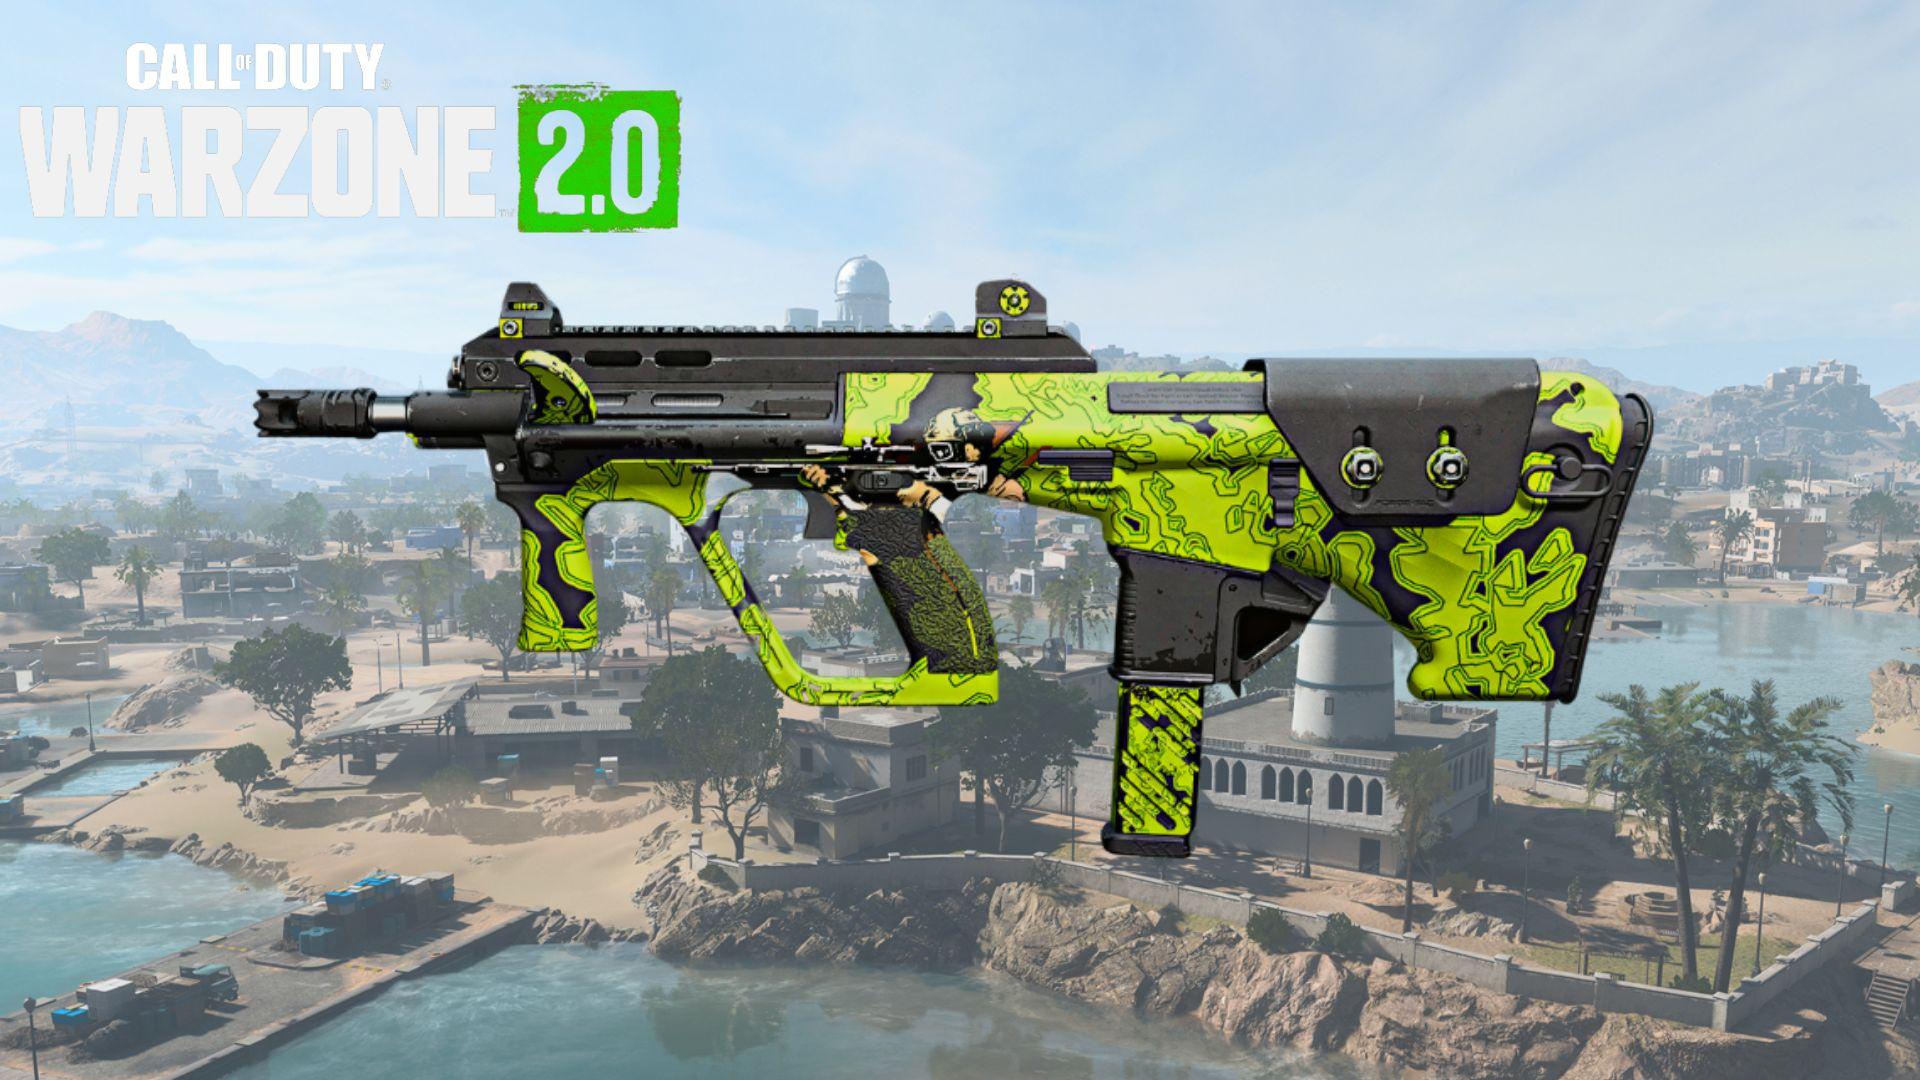 Warzone's new SMG makes no sense but lets see how it is. #warzone #mw2